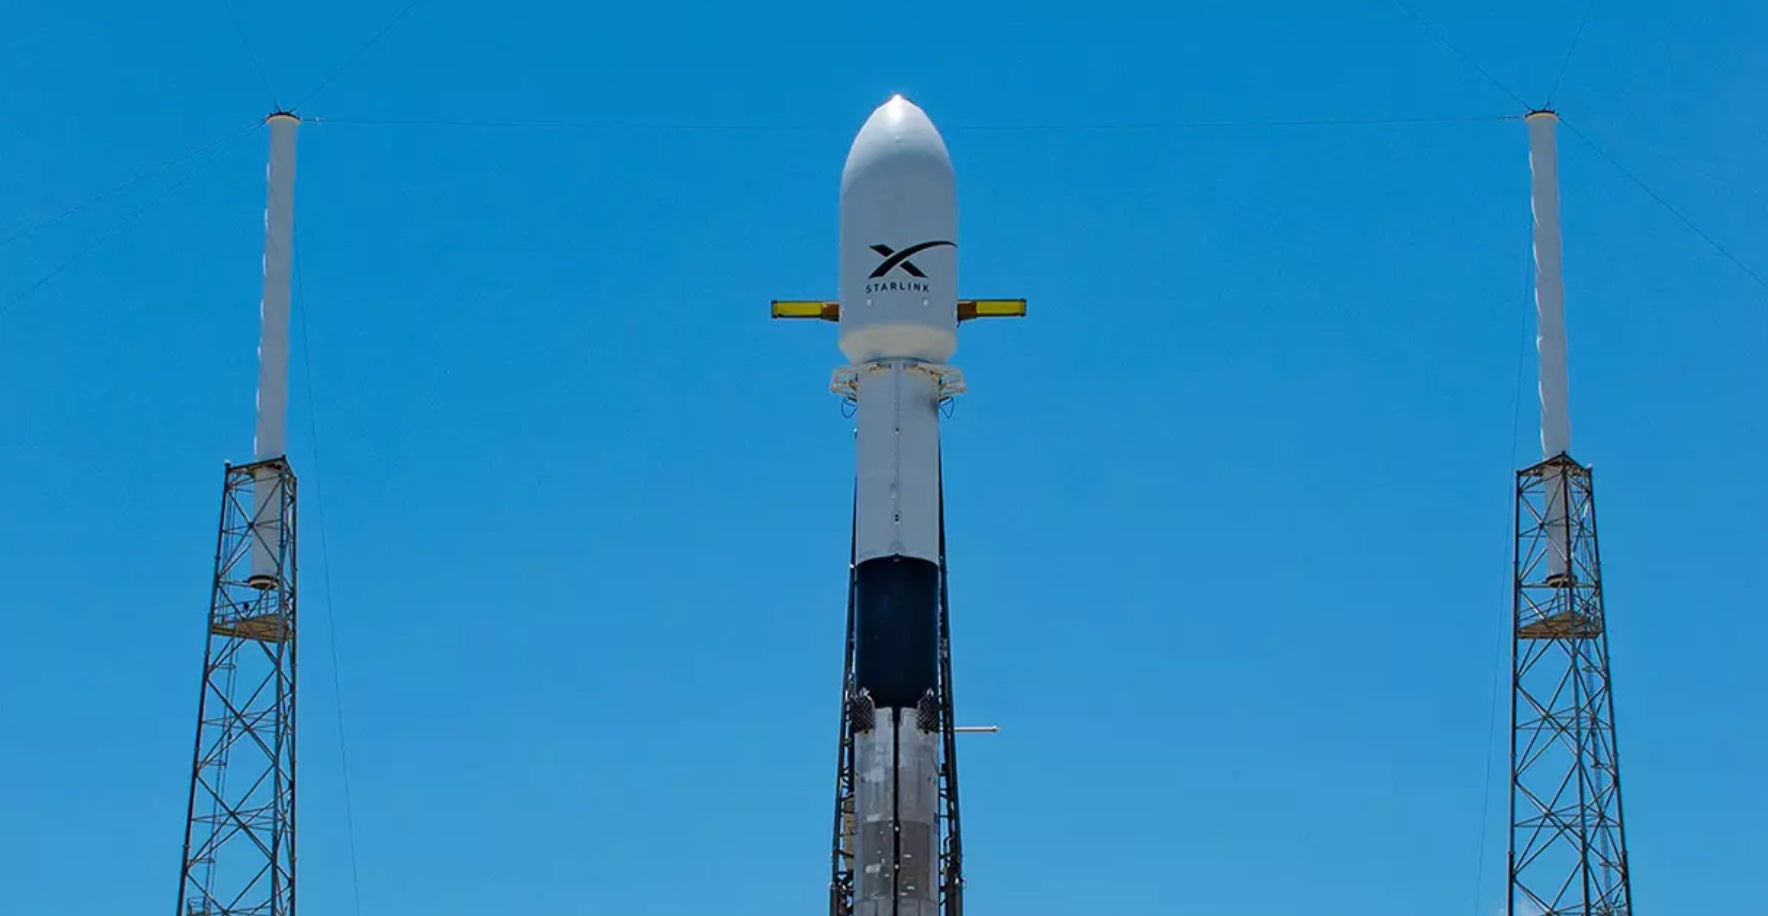 SpaceX Falcon 9 will be reused a record-breaking 12th time during upcoming Starlink mission –Watch It Live!